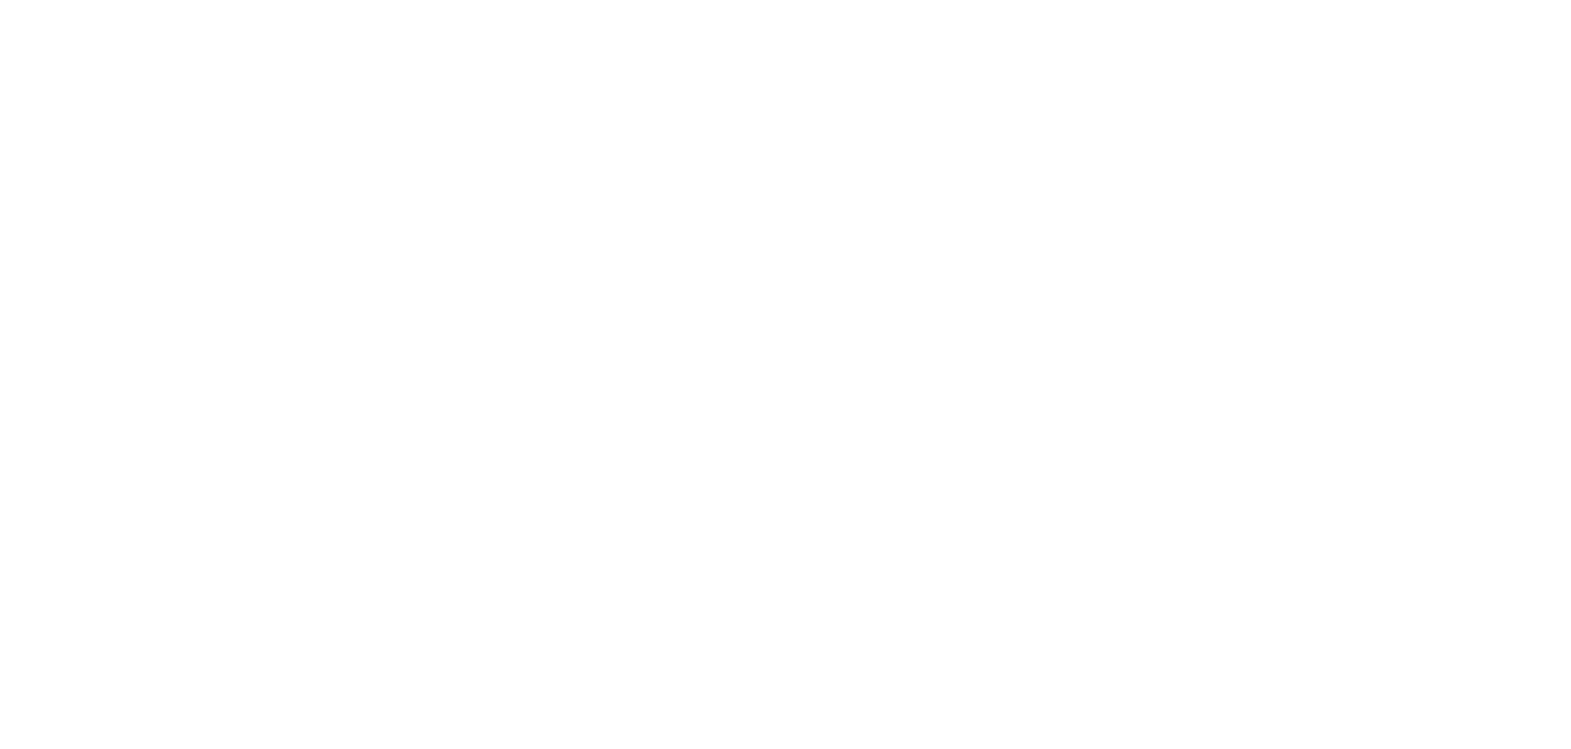 Flushing Financial Corp logo for dark backgrounds (transparent PNG)